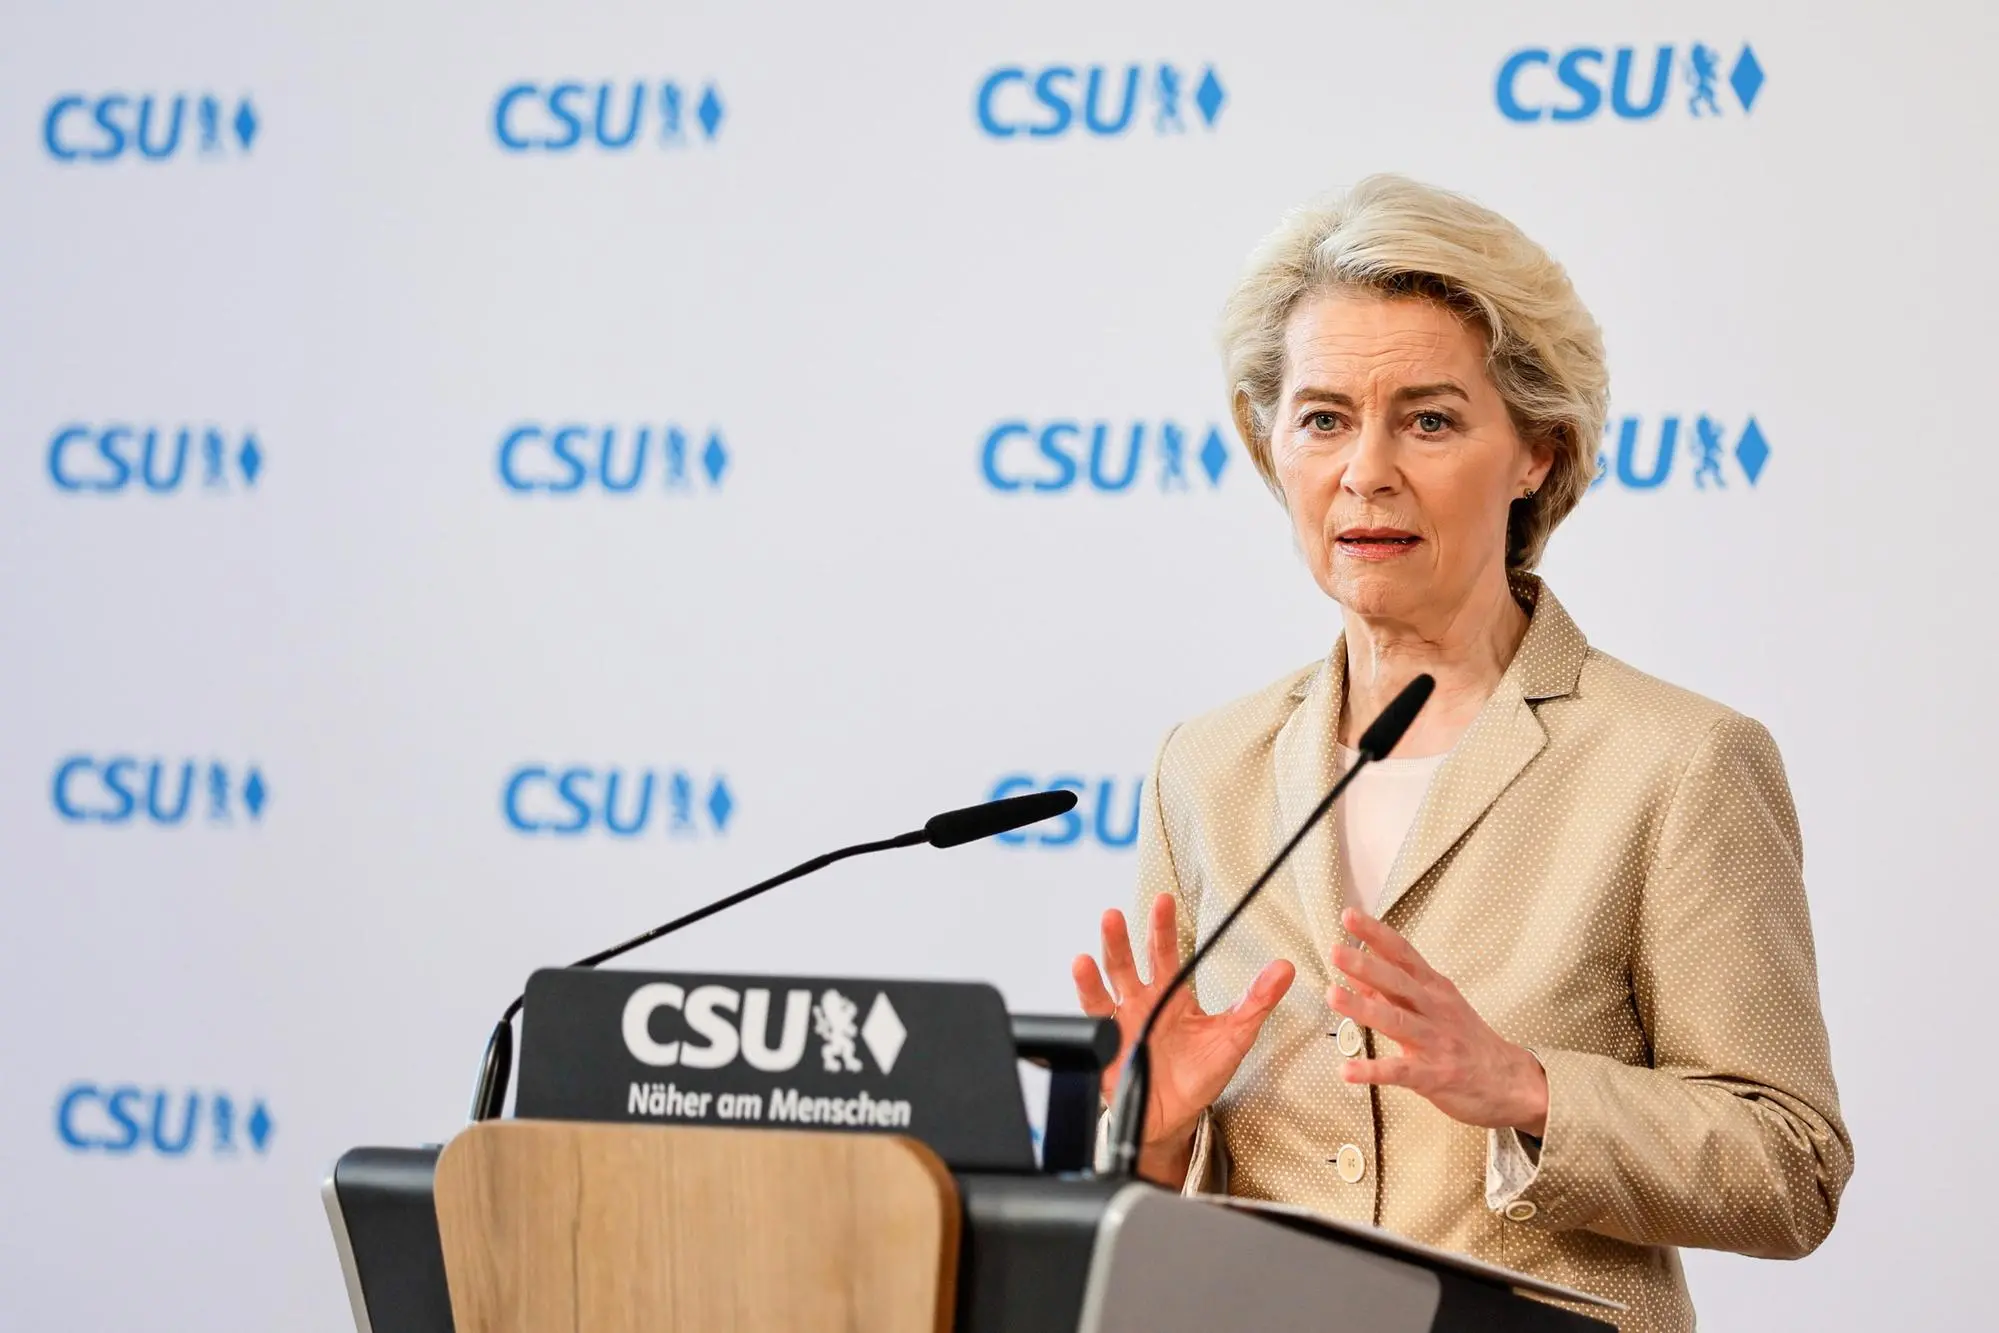 epa11157448 European Commission President Ursula von der Leyen speaks during a press statement for the 'Transatlantic Forum' as a side event of the 60th Munich Security Conference (MSC), in Munich, Germany, 16 February 2024. More than 500 high-level international decision-makers meet at the 60th Munich Security Conference in Munich during their annual meeting from 16 to 18 February 2024 to discuss global security issues. EPA/RONALD WITTEK